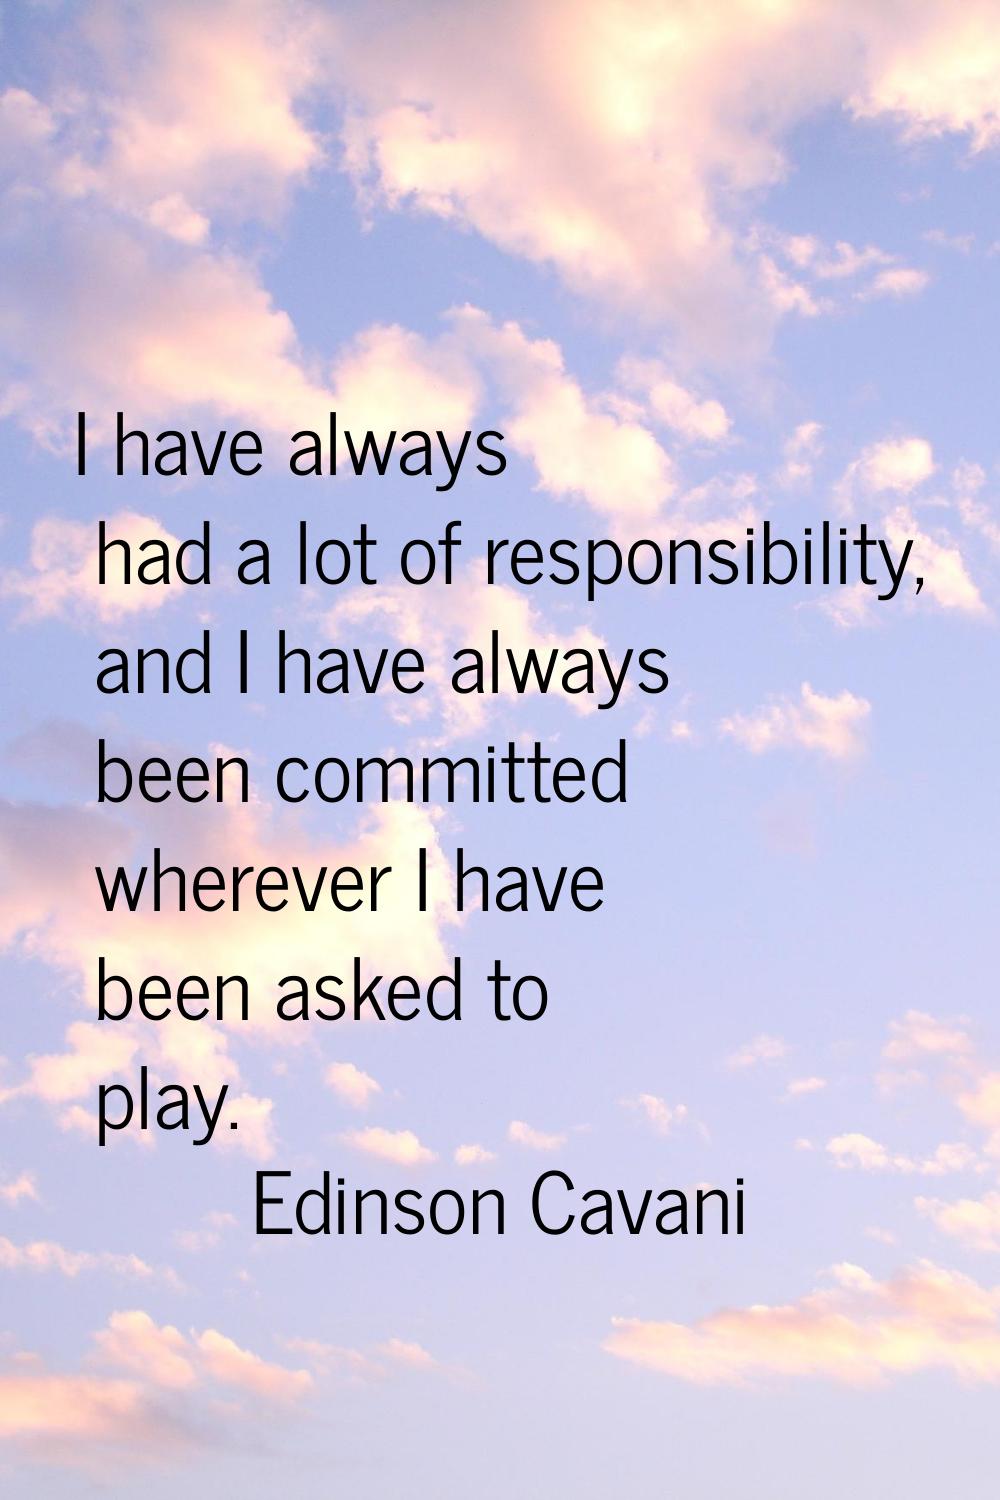 I have always had a lot of responsibility, and I have always been committed wherever I have been as